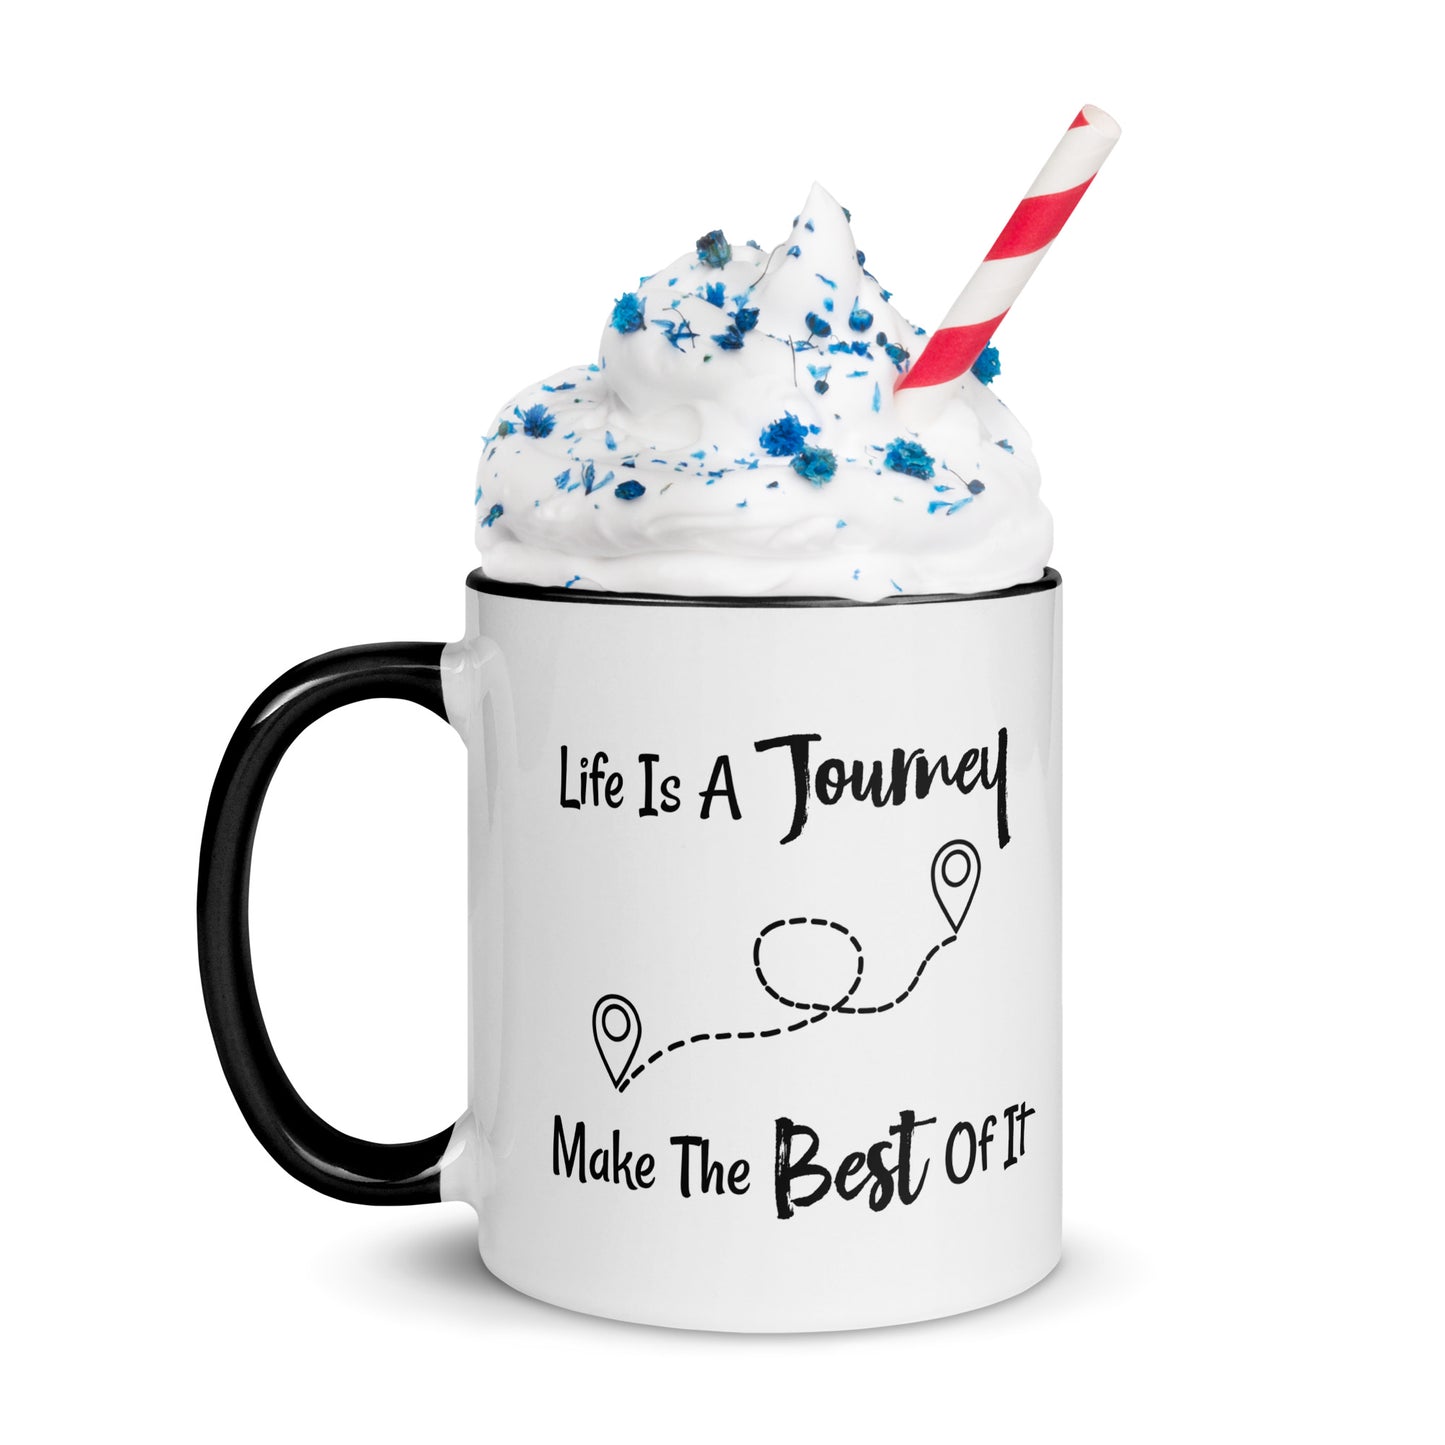 "Life Is A Journey, Make The Best Of It" Coffee Mug - Weave Got Gifts - Unique Gifts You Won’t Find Anywhere Else!